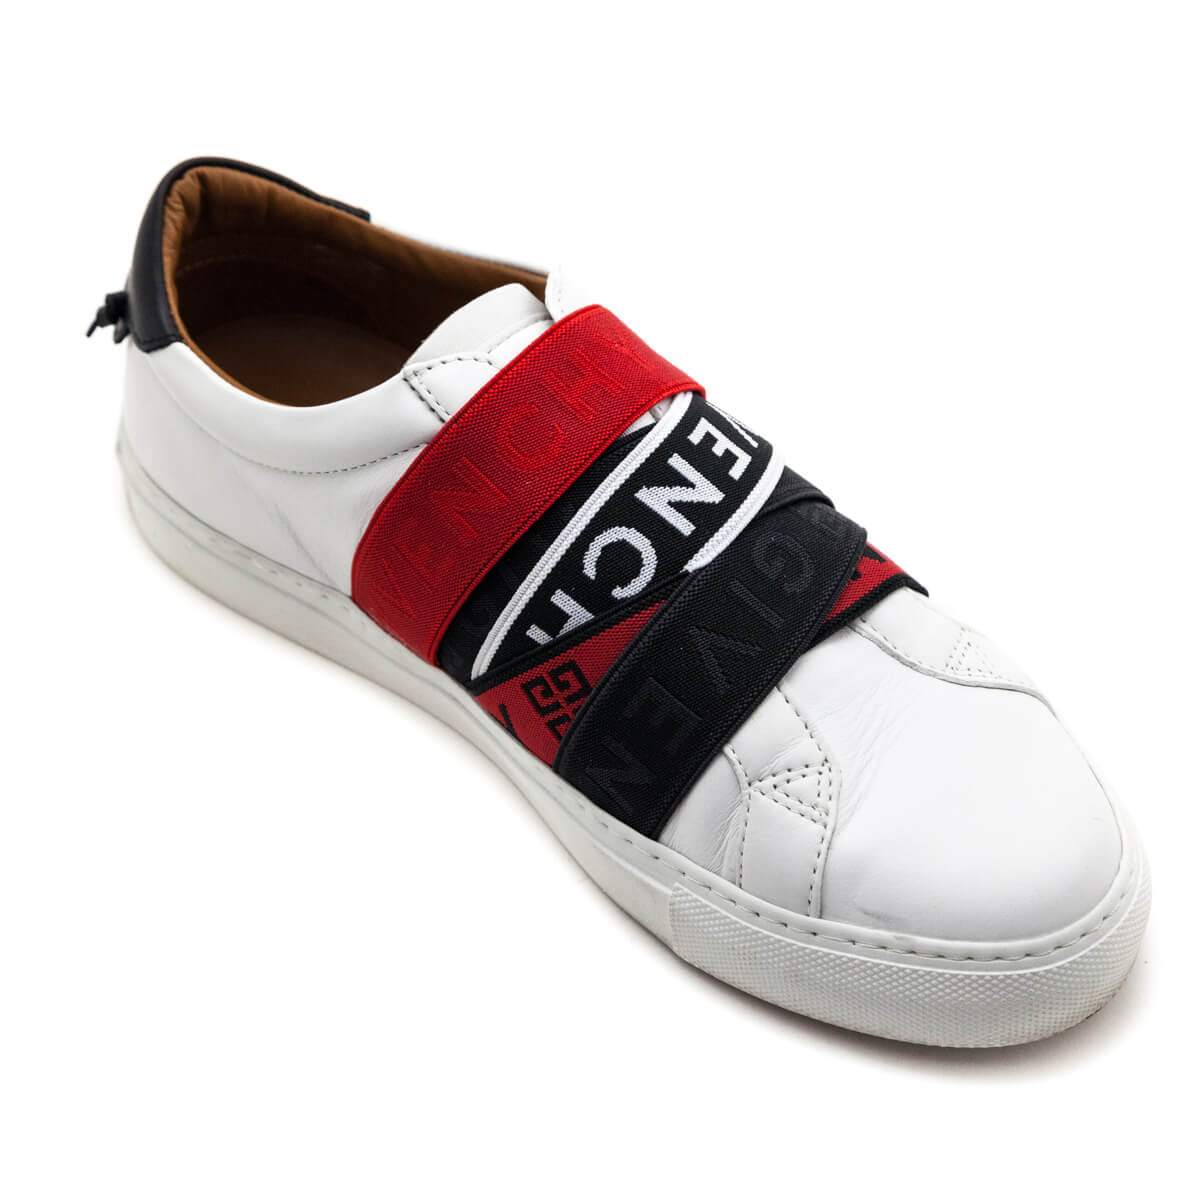 Givenchy White, Black & Red Urban Street Low Webbing Sneakers Size US 9 | EU 39 - Love that Bag etc - Preowned Authentic Designer Handbags & Preloved Fashions